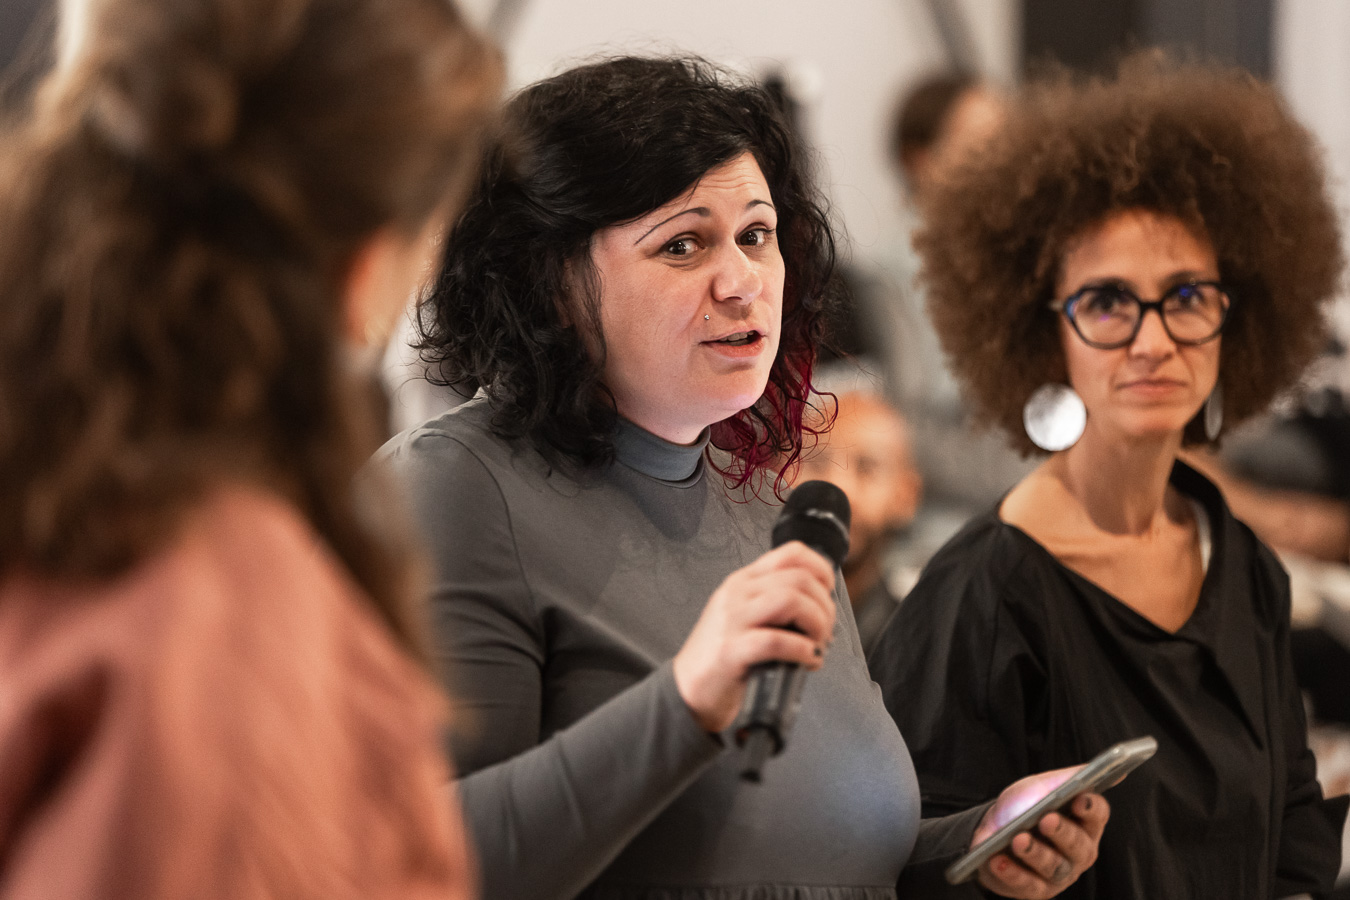 Megan Hoetger and Samia Henni at the opening of Performing Colonial Toxicity (2023) at Framer Framed. Photo: Maarten Nauw.